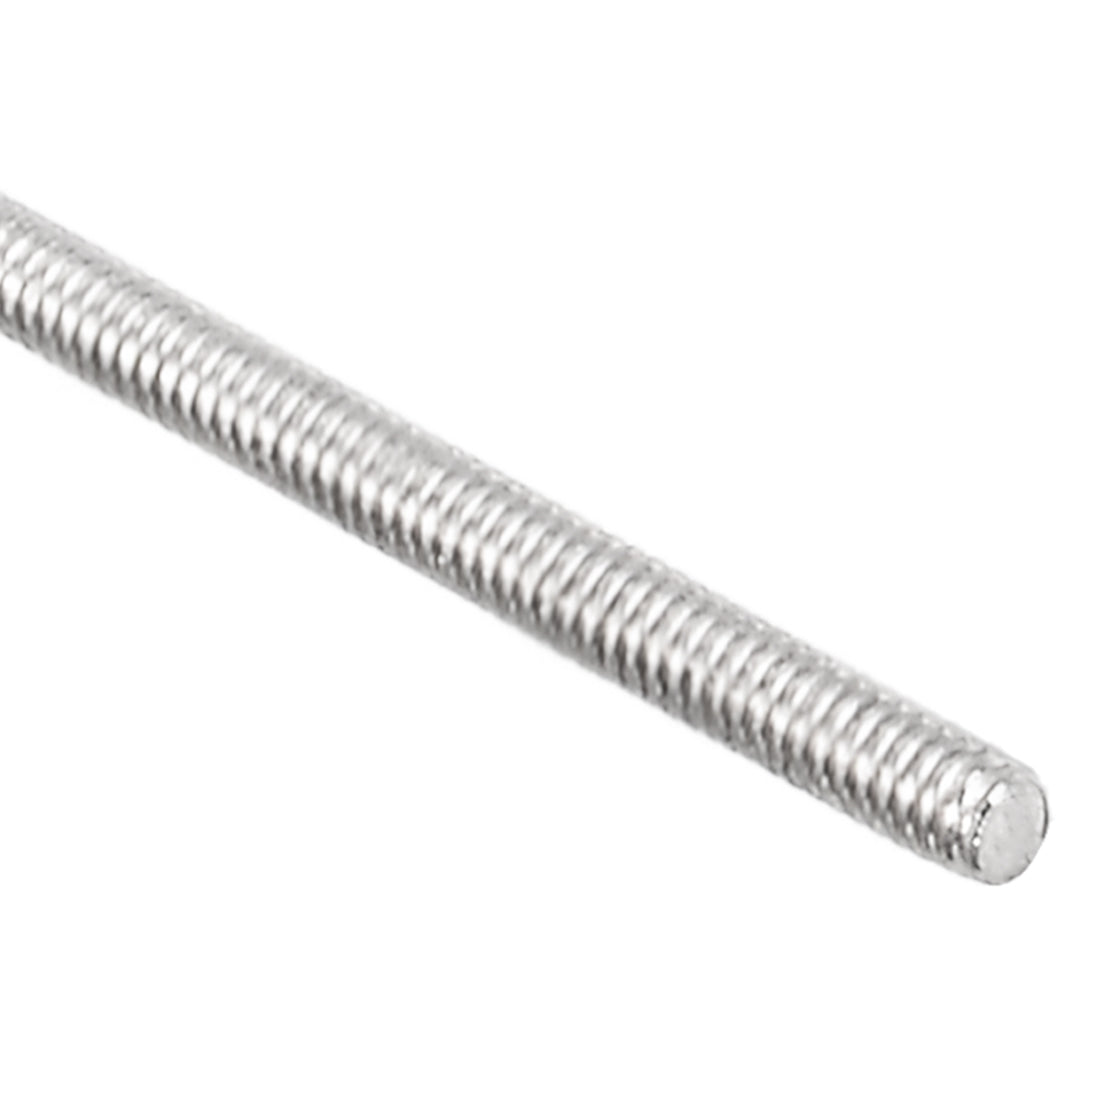 uxcell Uxcell M2 x 250mm Fully Threaded Rod 304 Stainless Steel Right Hand Threads